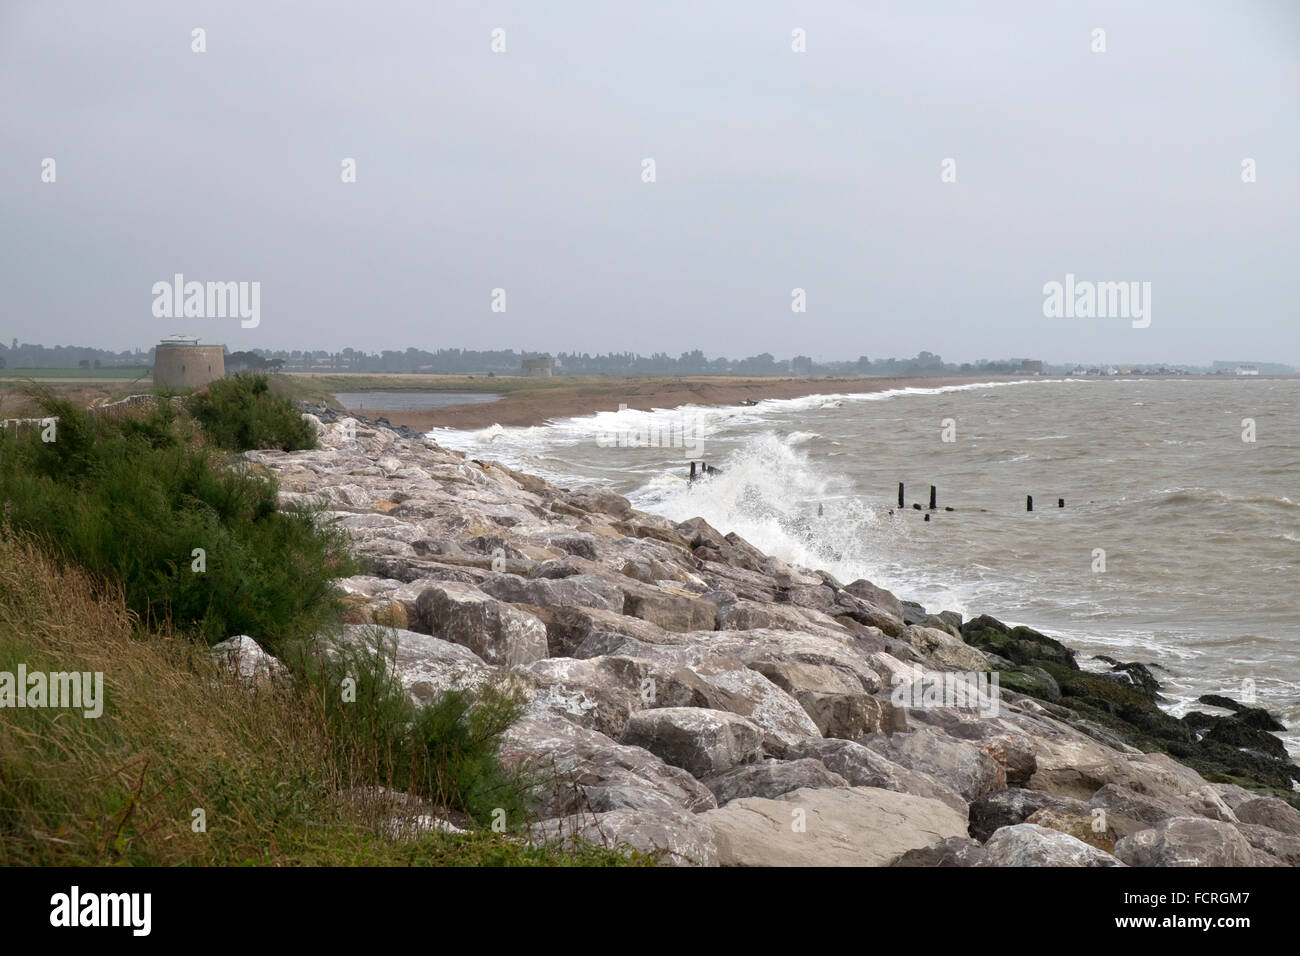 Rock armour protecting the coast at Bawdsey from coastal erosion Stock Photo